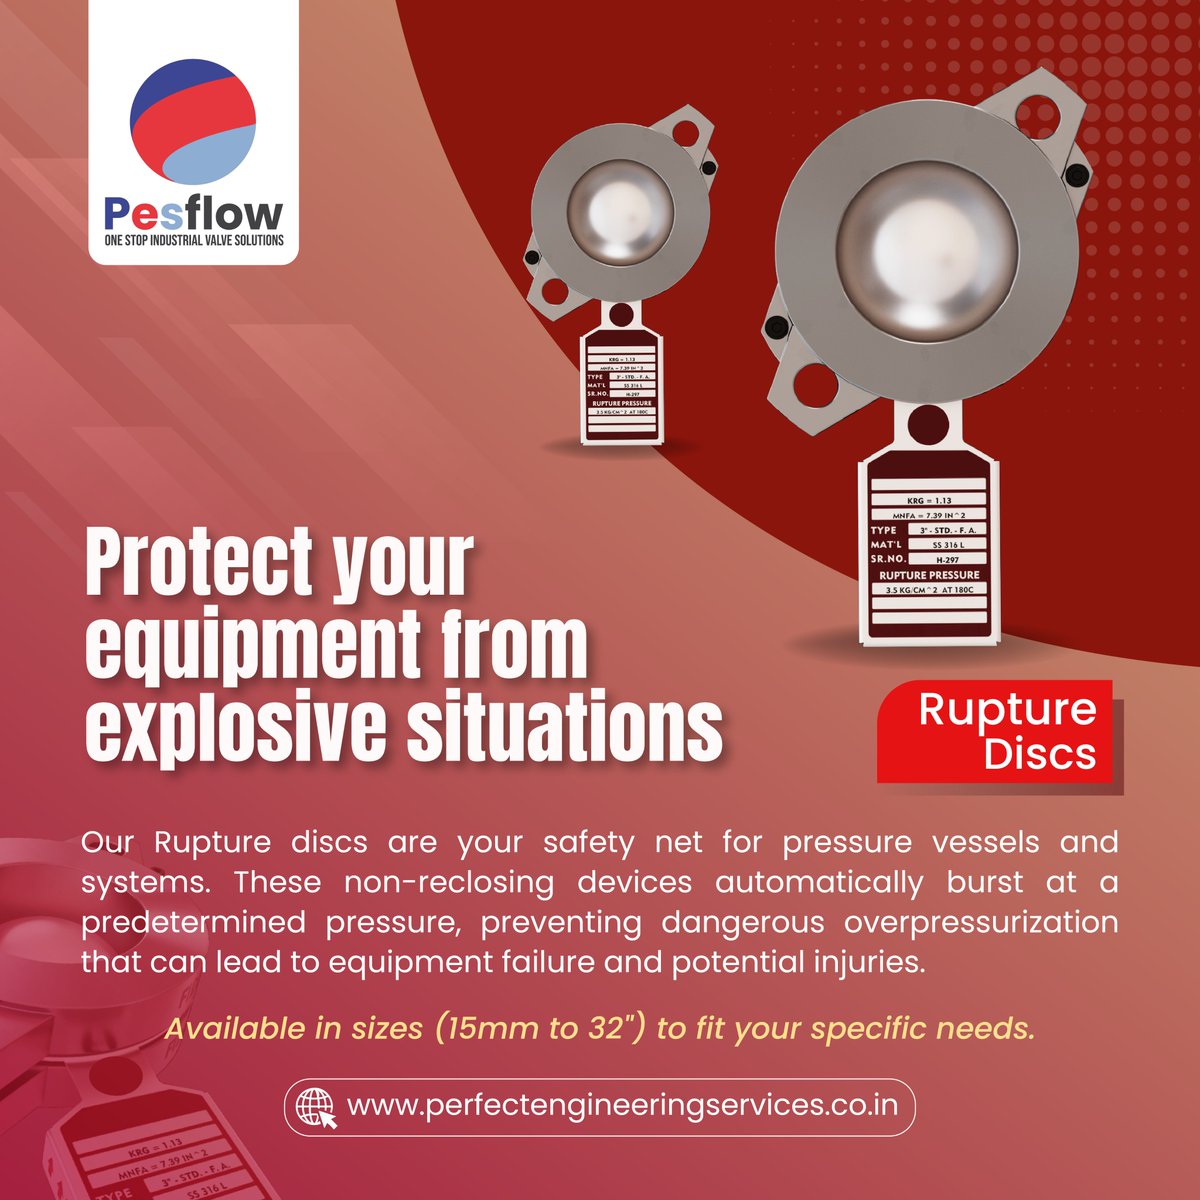 Ensure equipment safety with our rupture discs. Bursting at preset pressures, they prevent overpressurization, avoiding failures and injuries
For more info:
Call: 081042 72133
Website:perfectengineeringservices.co.in/rupture-disc/ 
#SafetyFirst #EquipmentProtection #PressureSafety #IndustrialSafety